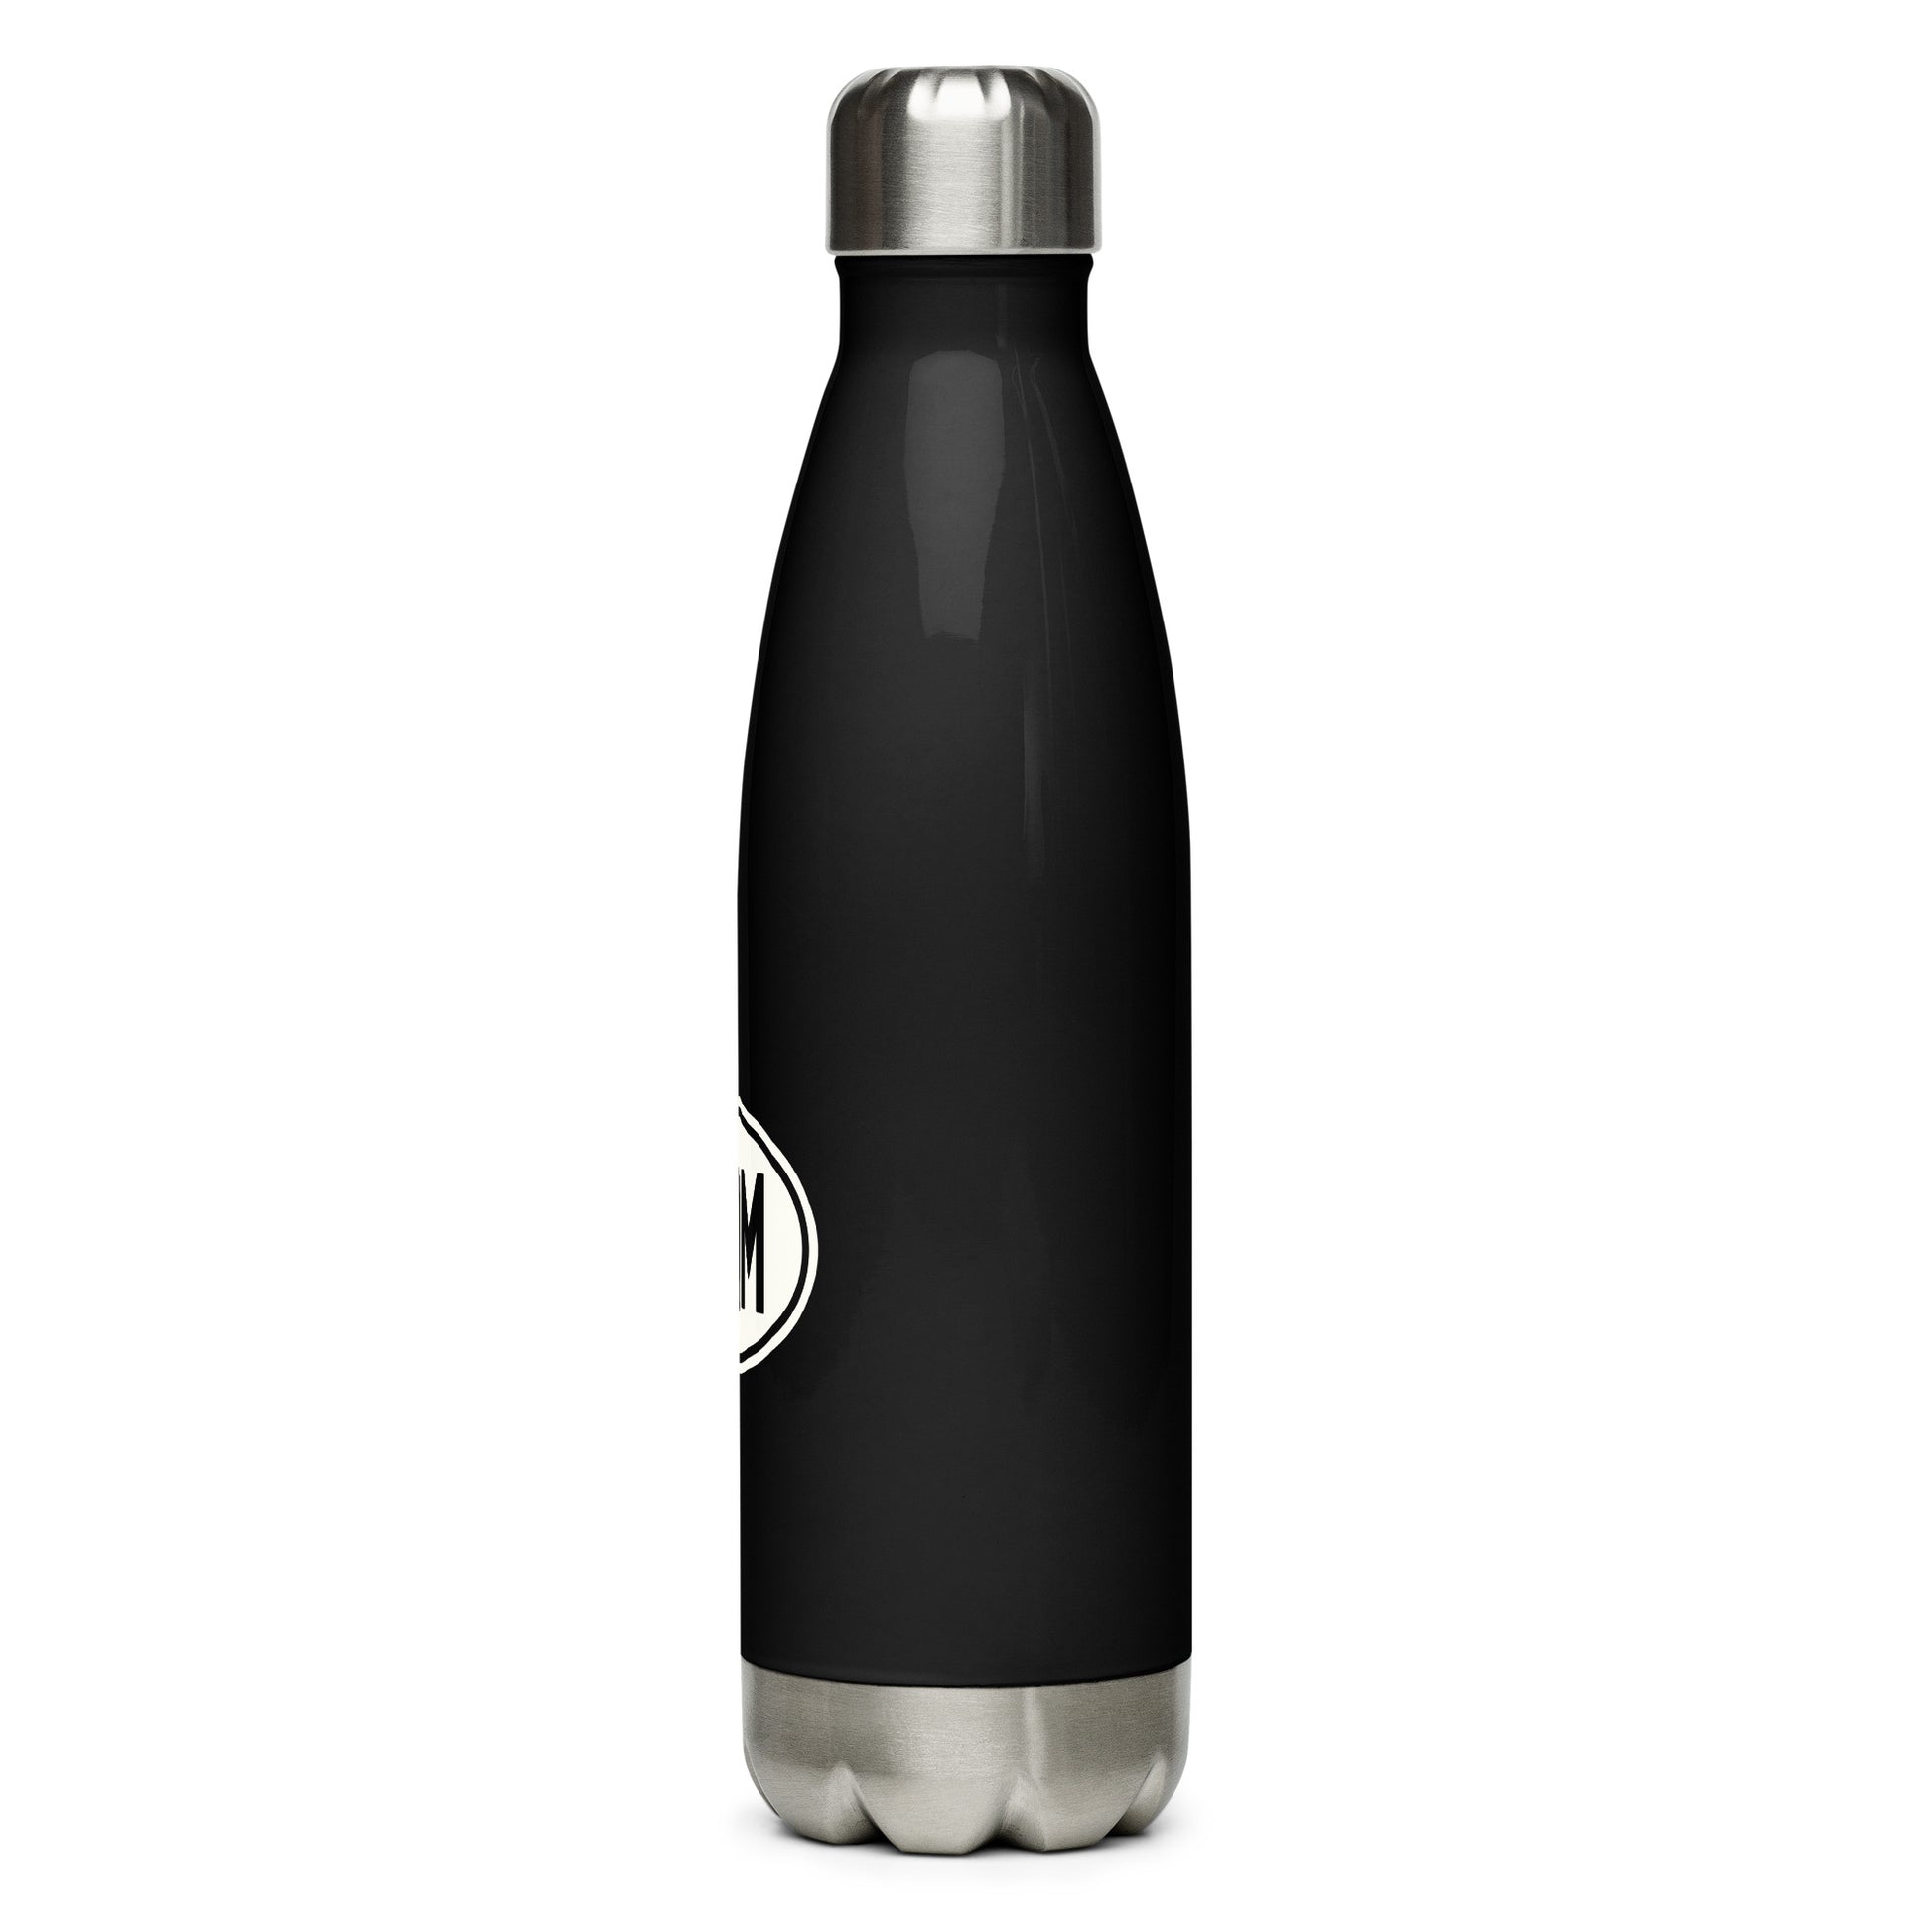 Unique Travel Gift Water Bottle - White Oval • YQM Moncton • YHM Designs - Image 06